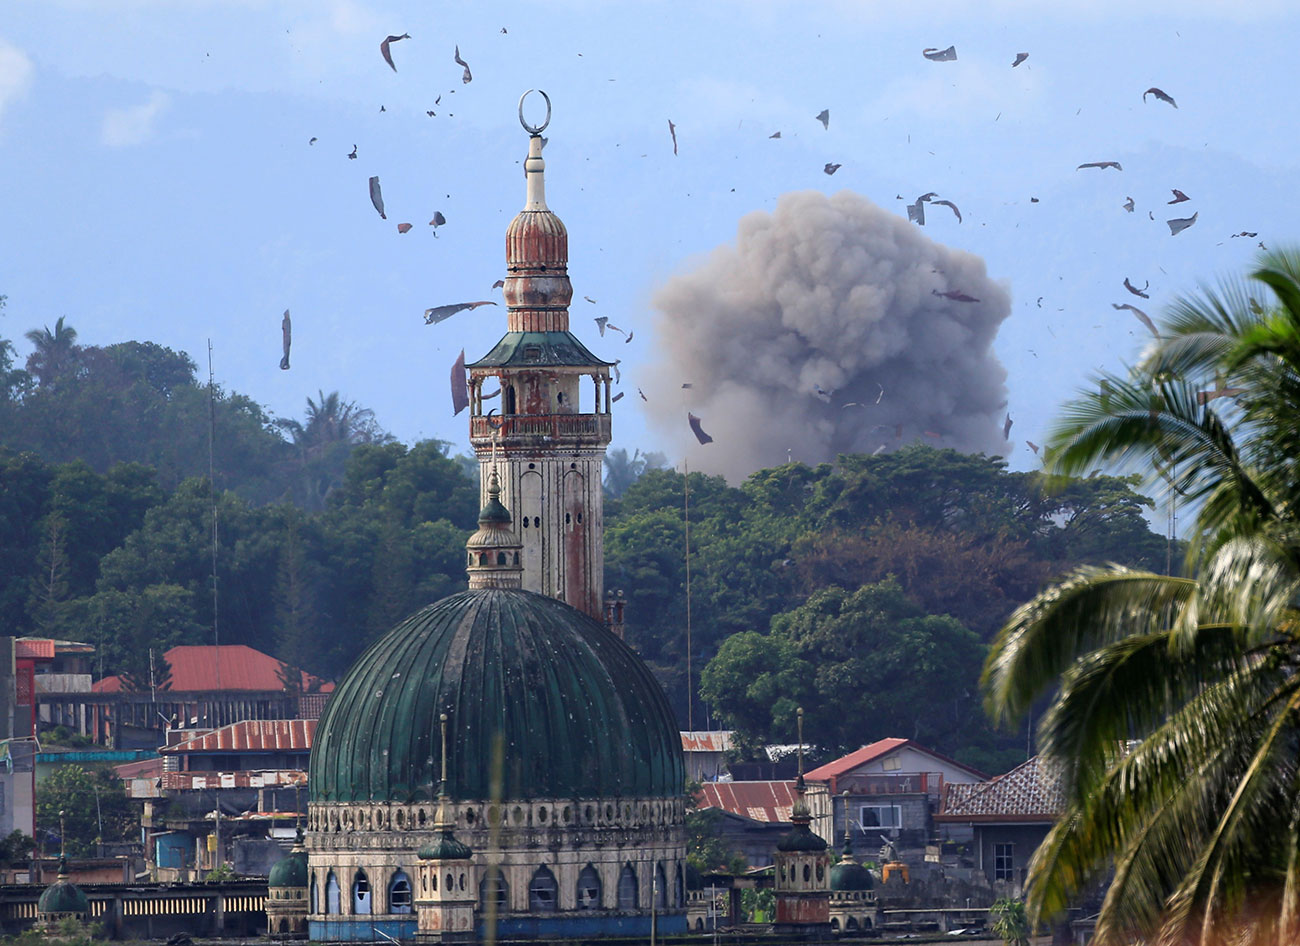 Debris and smoke billow are seen after an OV-10 Bronco aircraft released a bomb, during an airstrike, as government troops continue their assault against insurgents from the Maute group, who have taken over parts of Marawi city